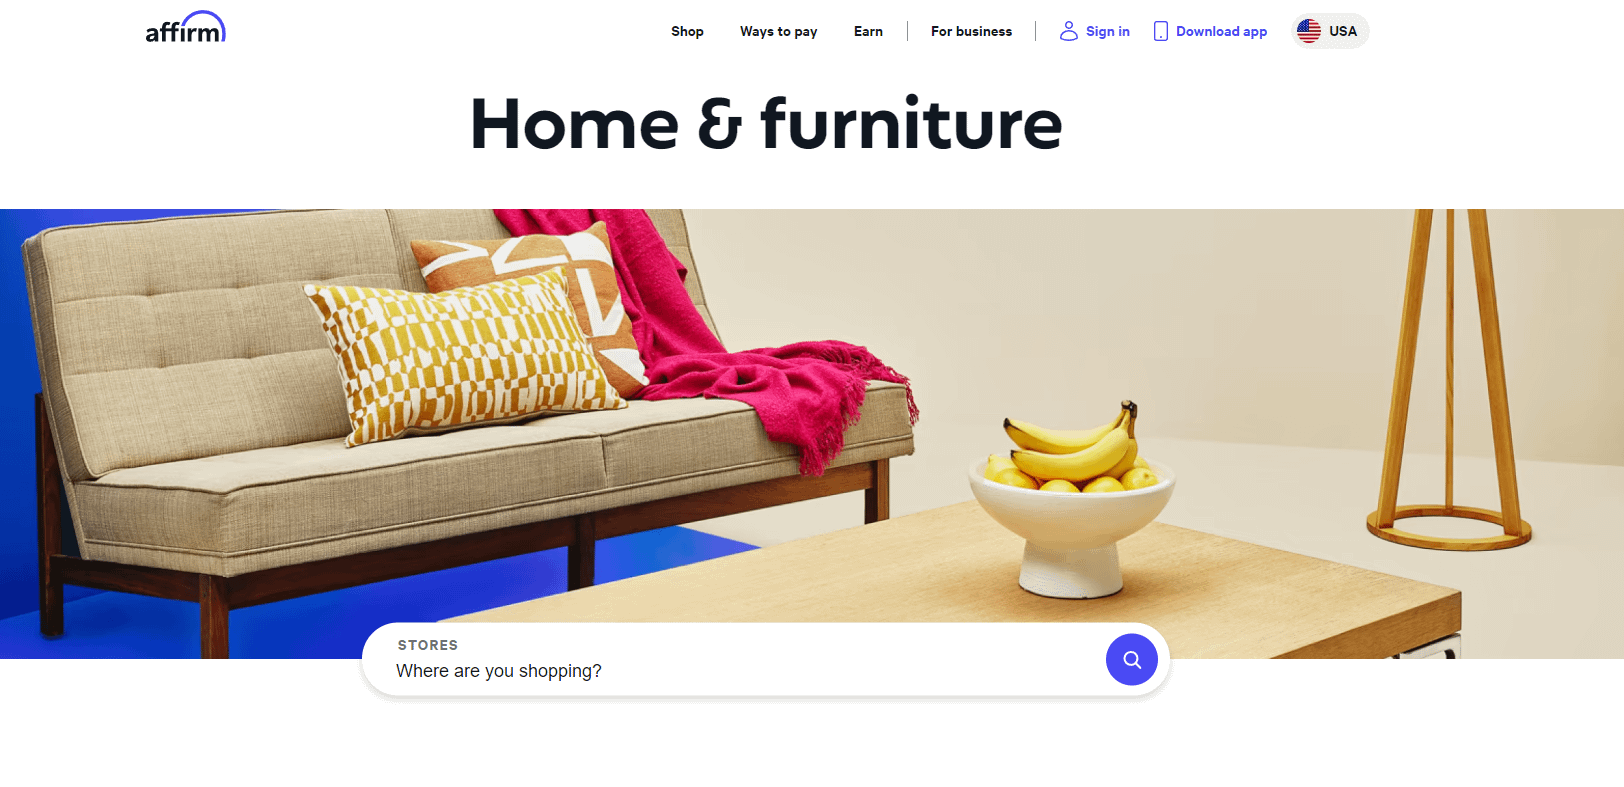 Affirm - Home and Furniture page